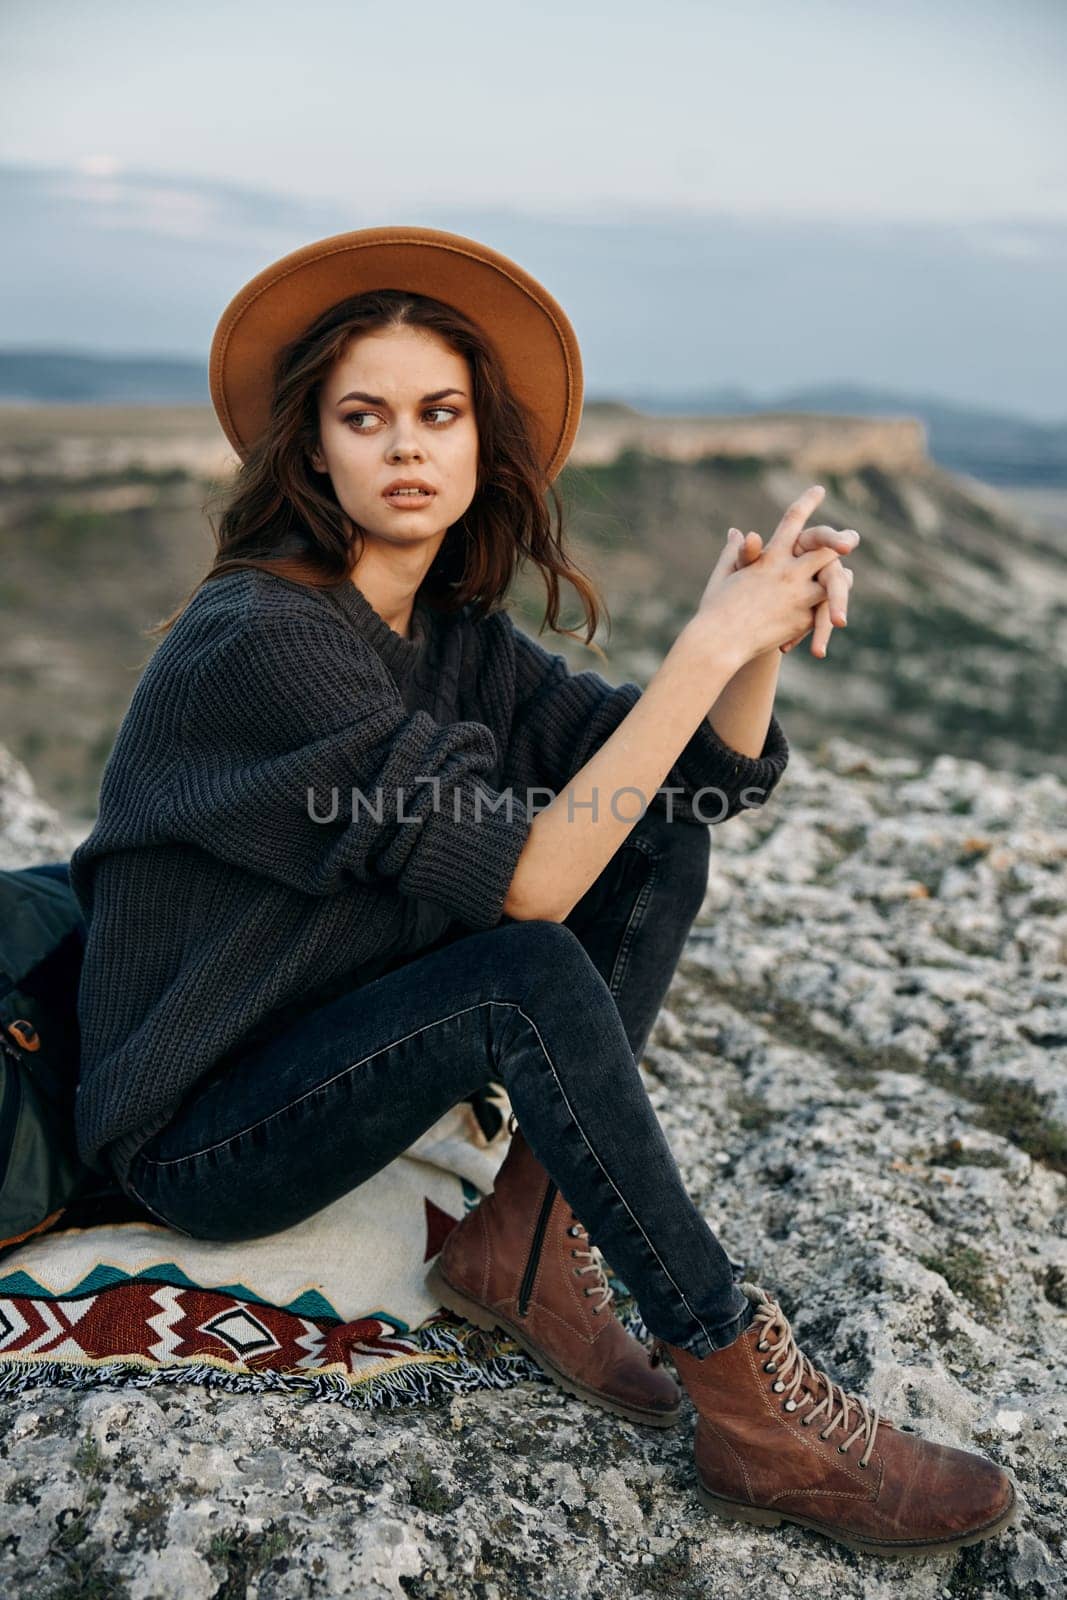 Serene moment woman in hat on mountaintop checking cell phone with picturesque view in background